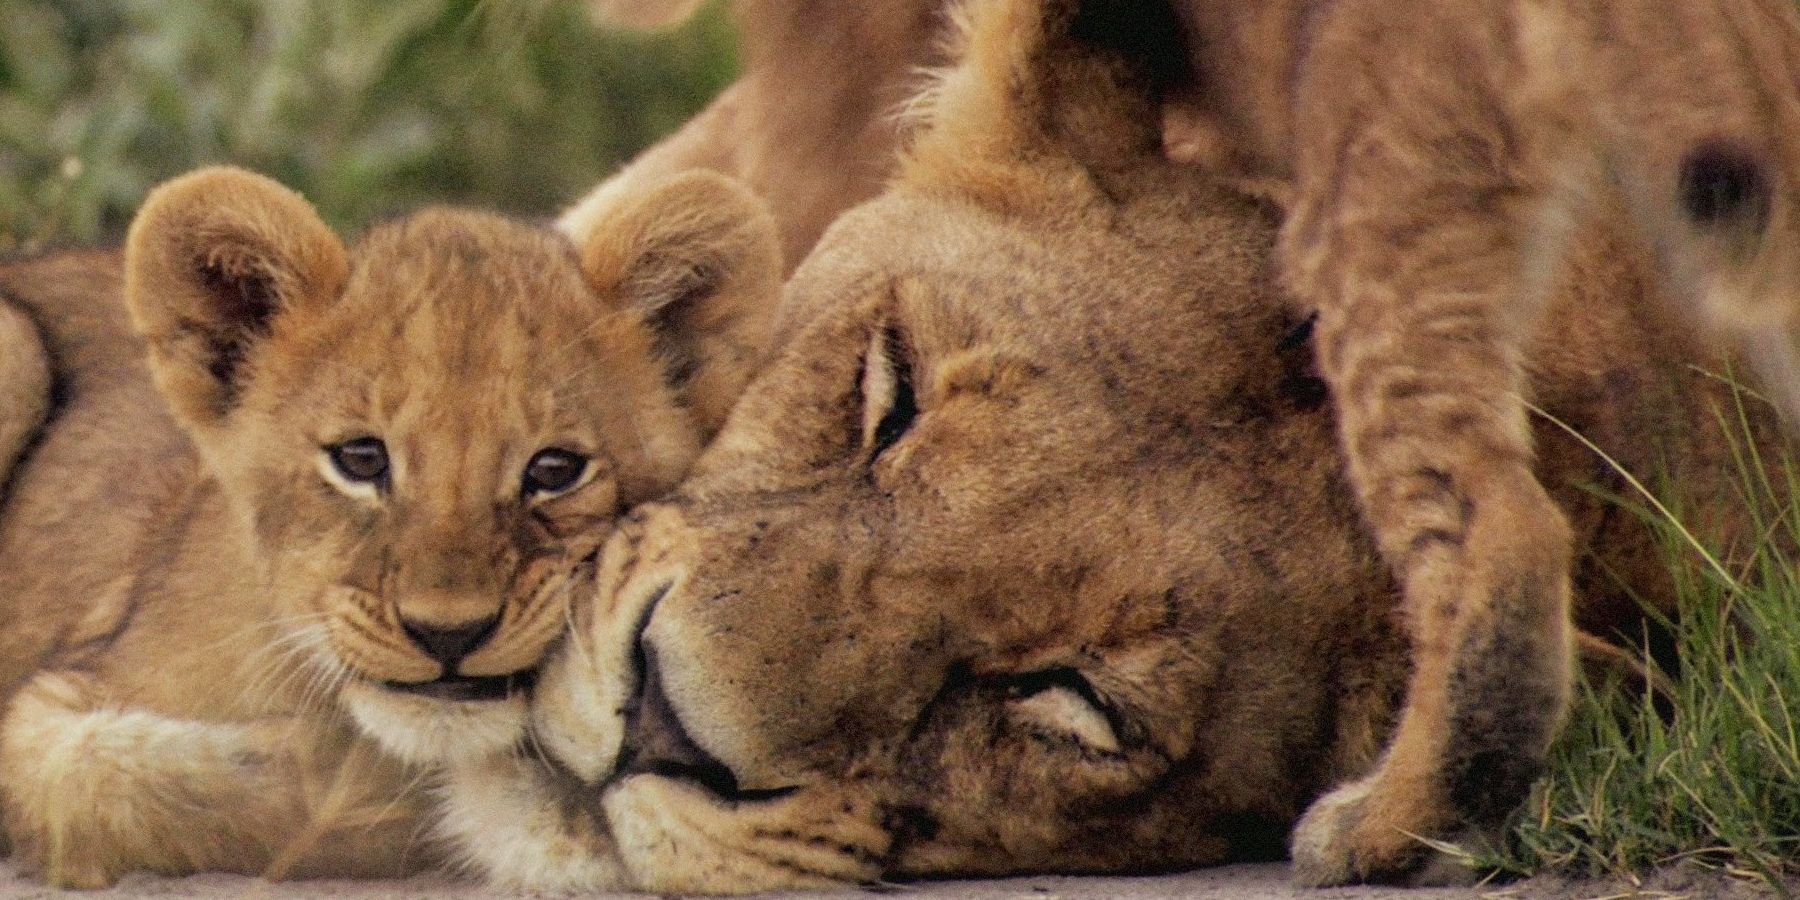 10 Best Documentaries About Animals Ranked By IMDb Score